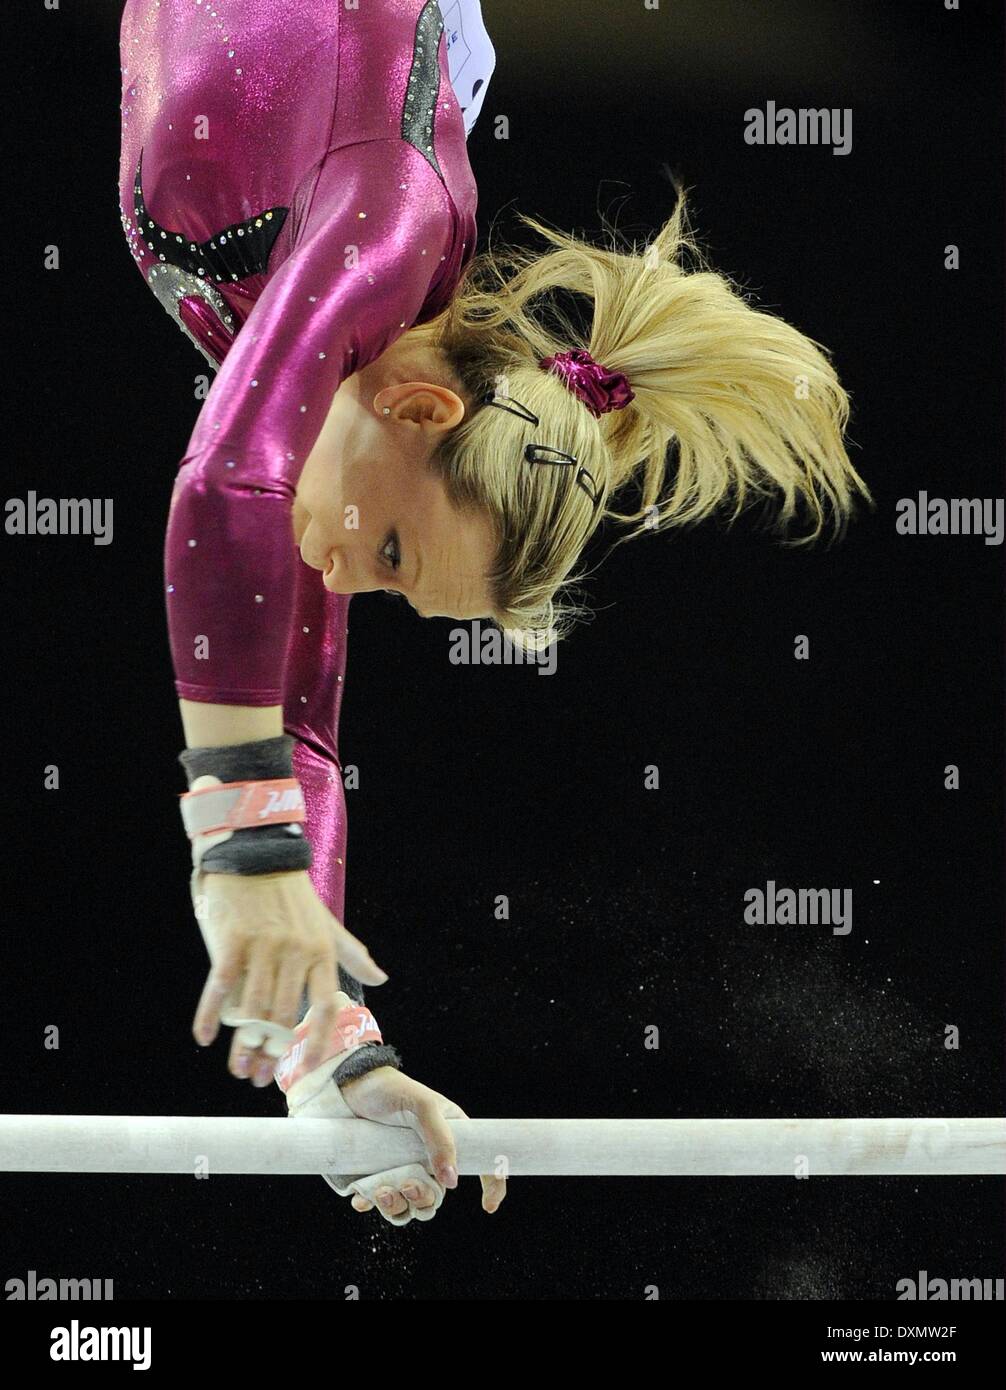 Doha, Qatar. 27th Mar, 2014. Jana Sikulova of the Czech Republic competes  during the women's uneven bars final at the 7th FIG Artistic Gymnastics  World Challenge Cup in Doha, Qatar, on March